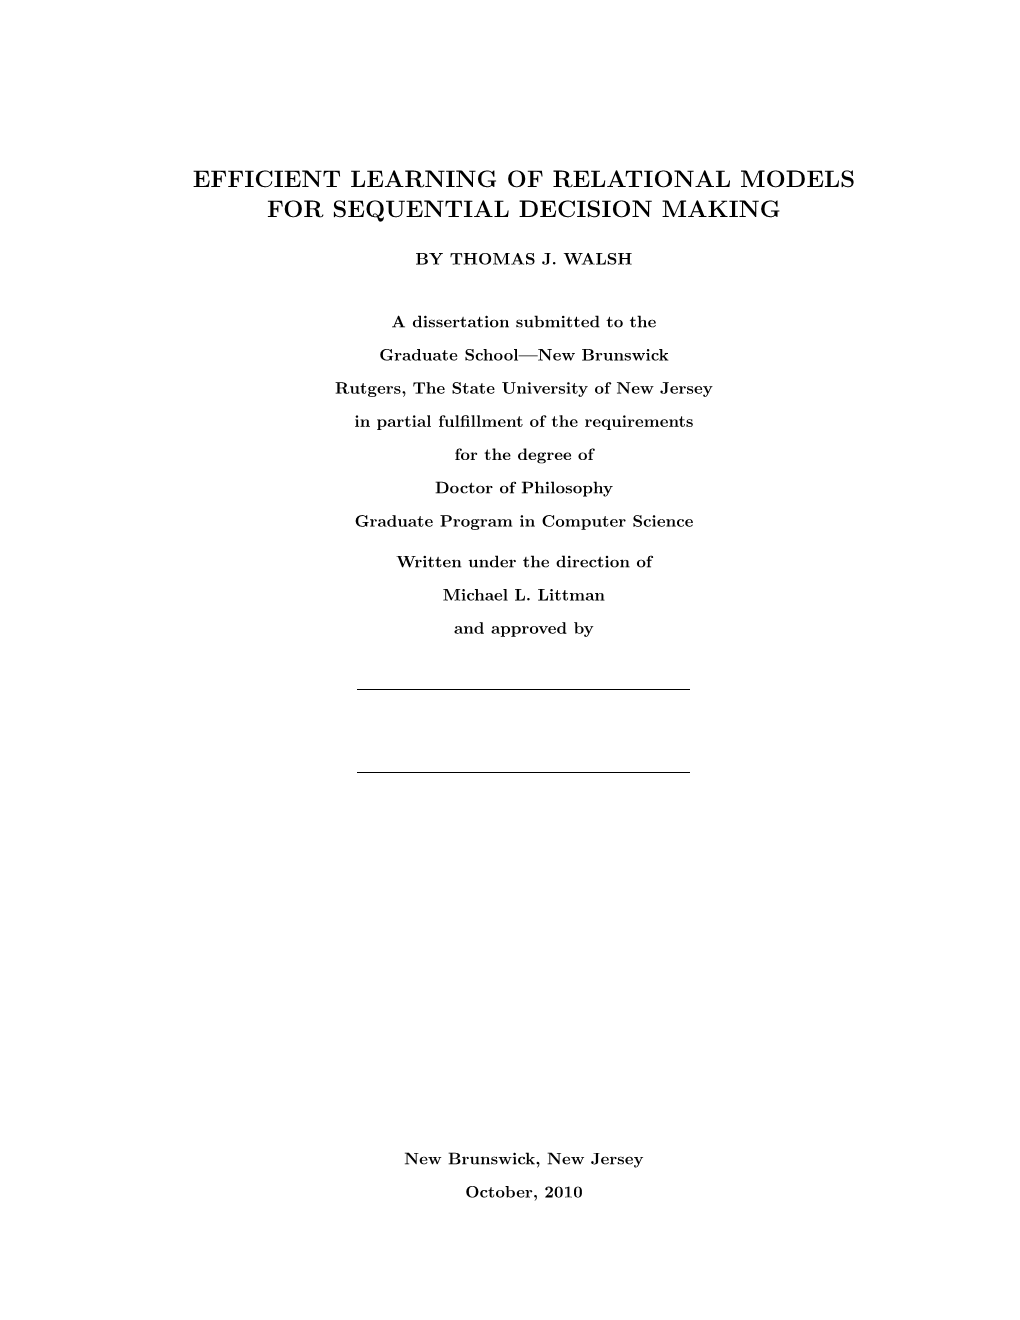 Efficient Learning of Relational Models for Sequential Decision Making